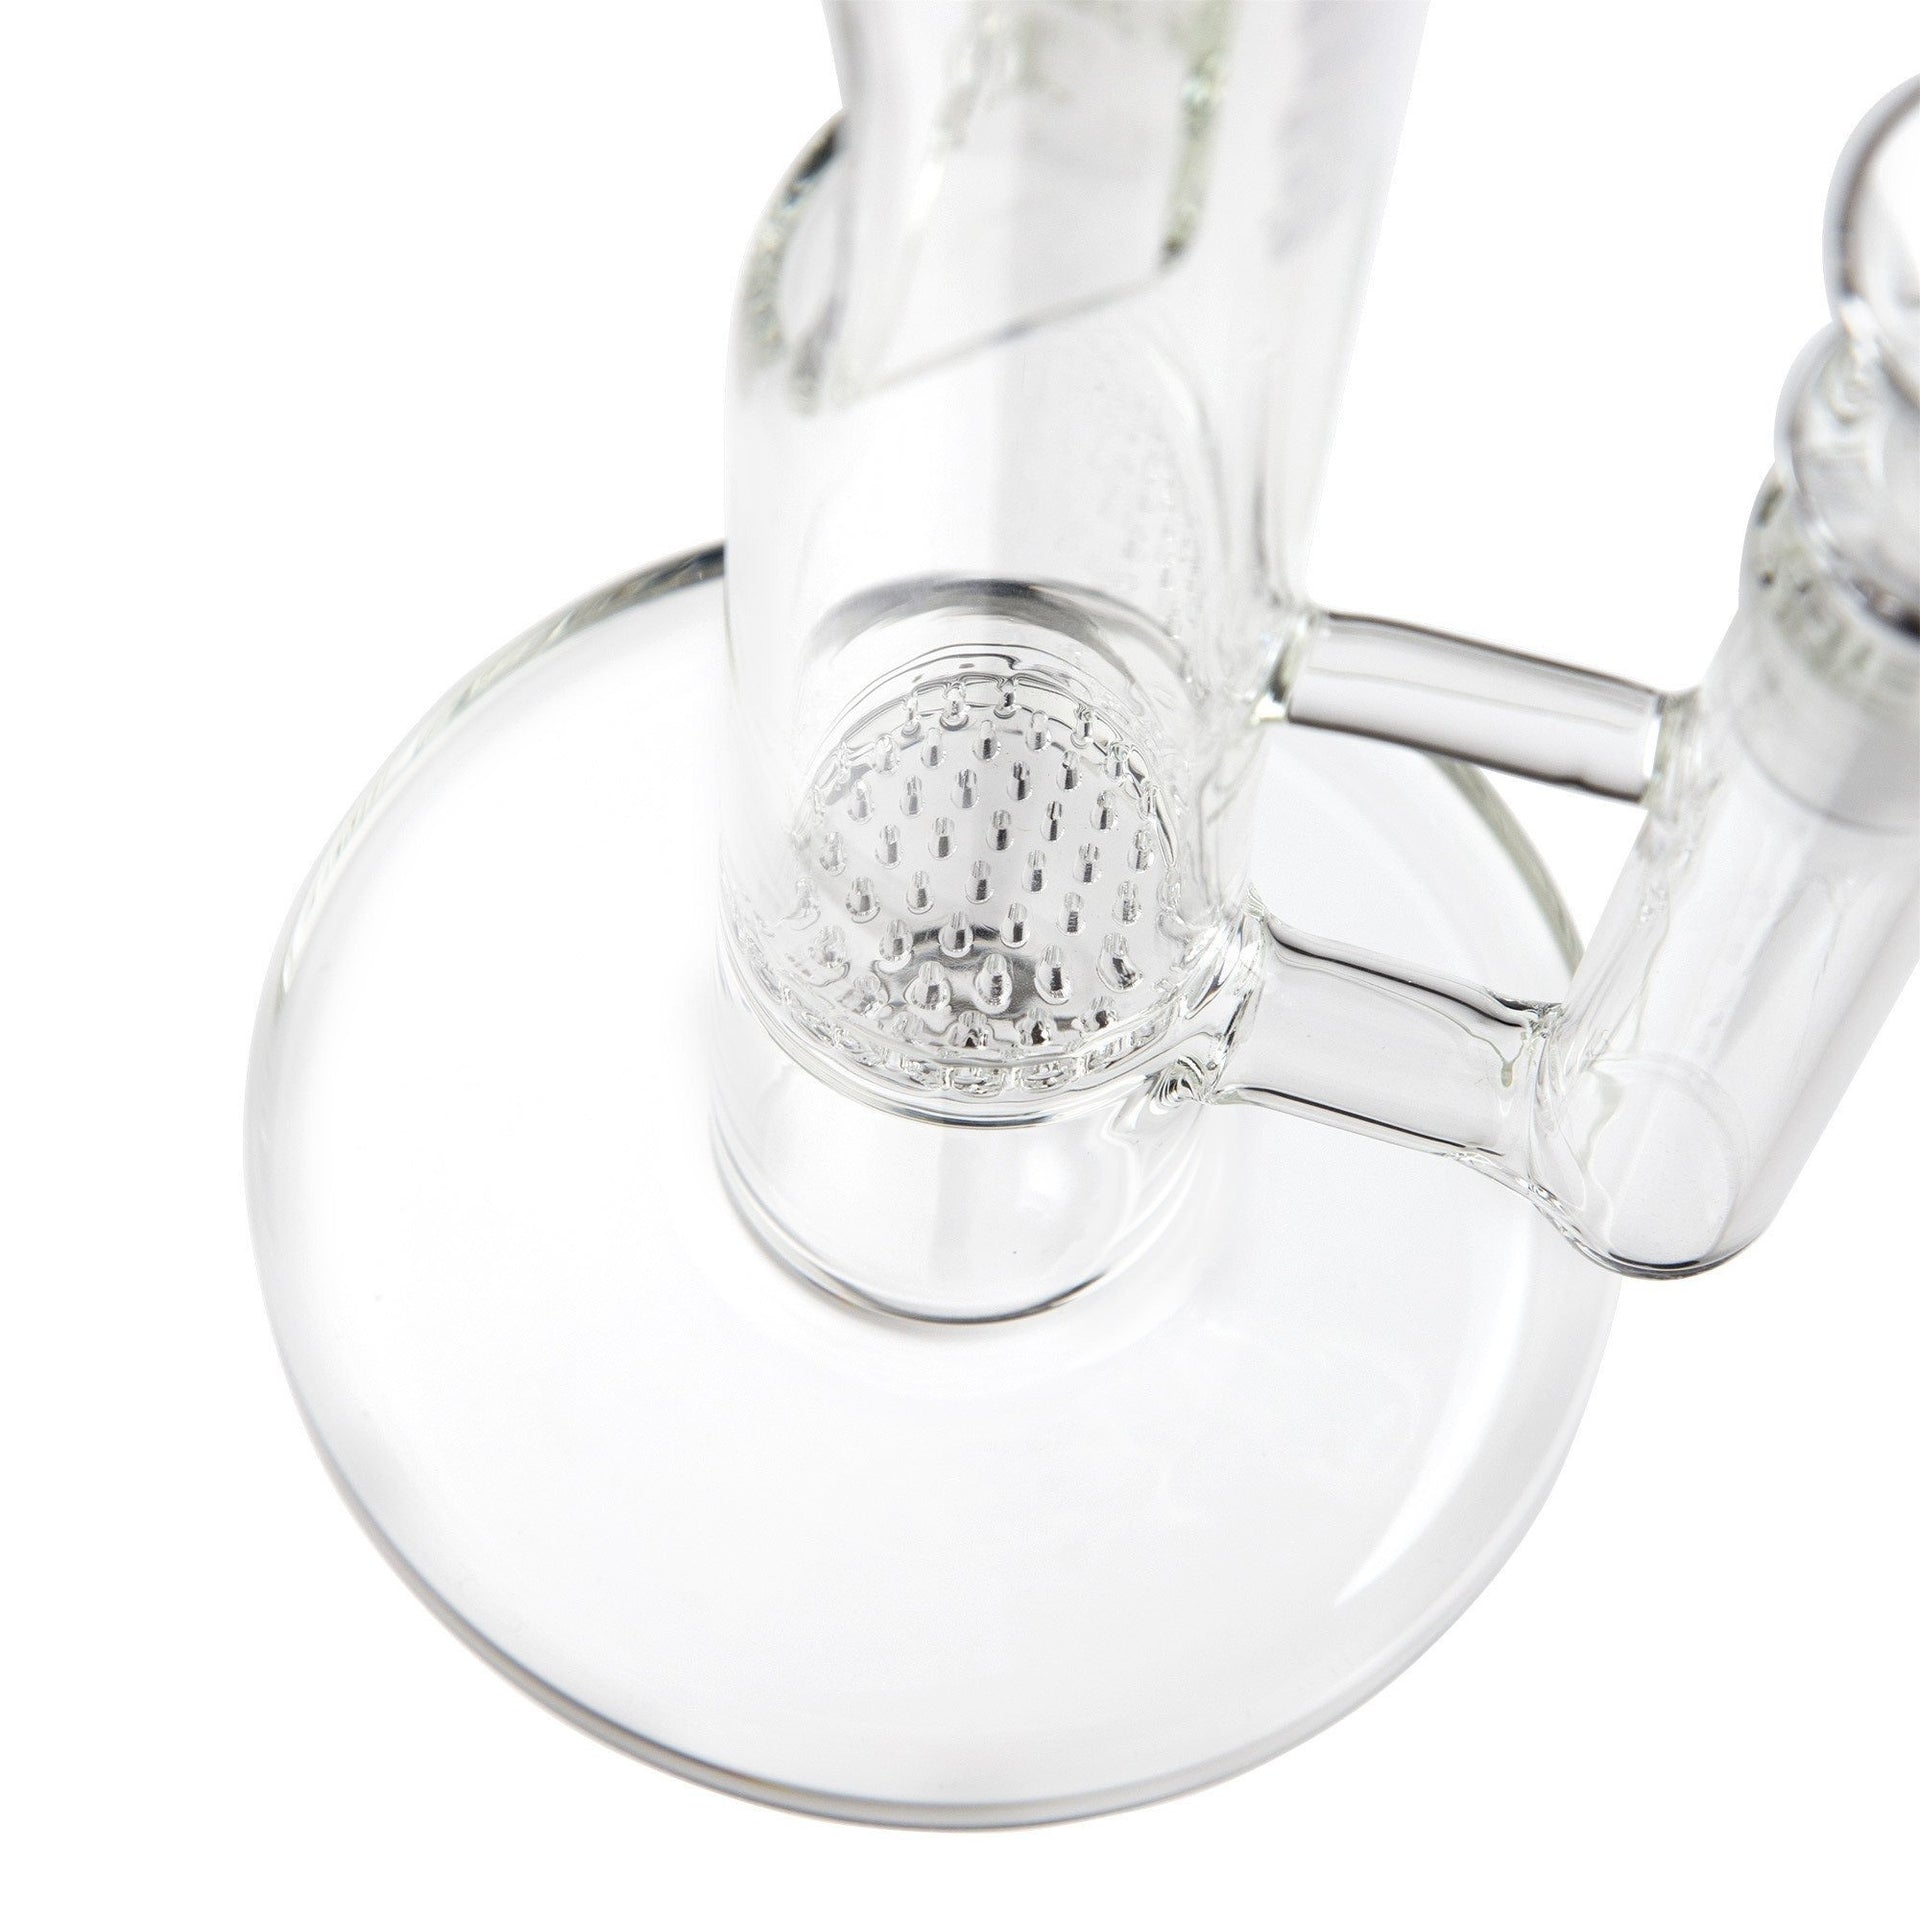 GRAV 12in Flare Water Pipe w/ Honey Comb Disc - Clear - 420 Science - The most trusted online smoke shop.